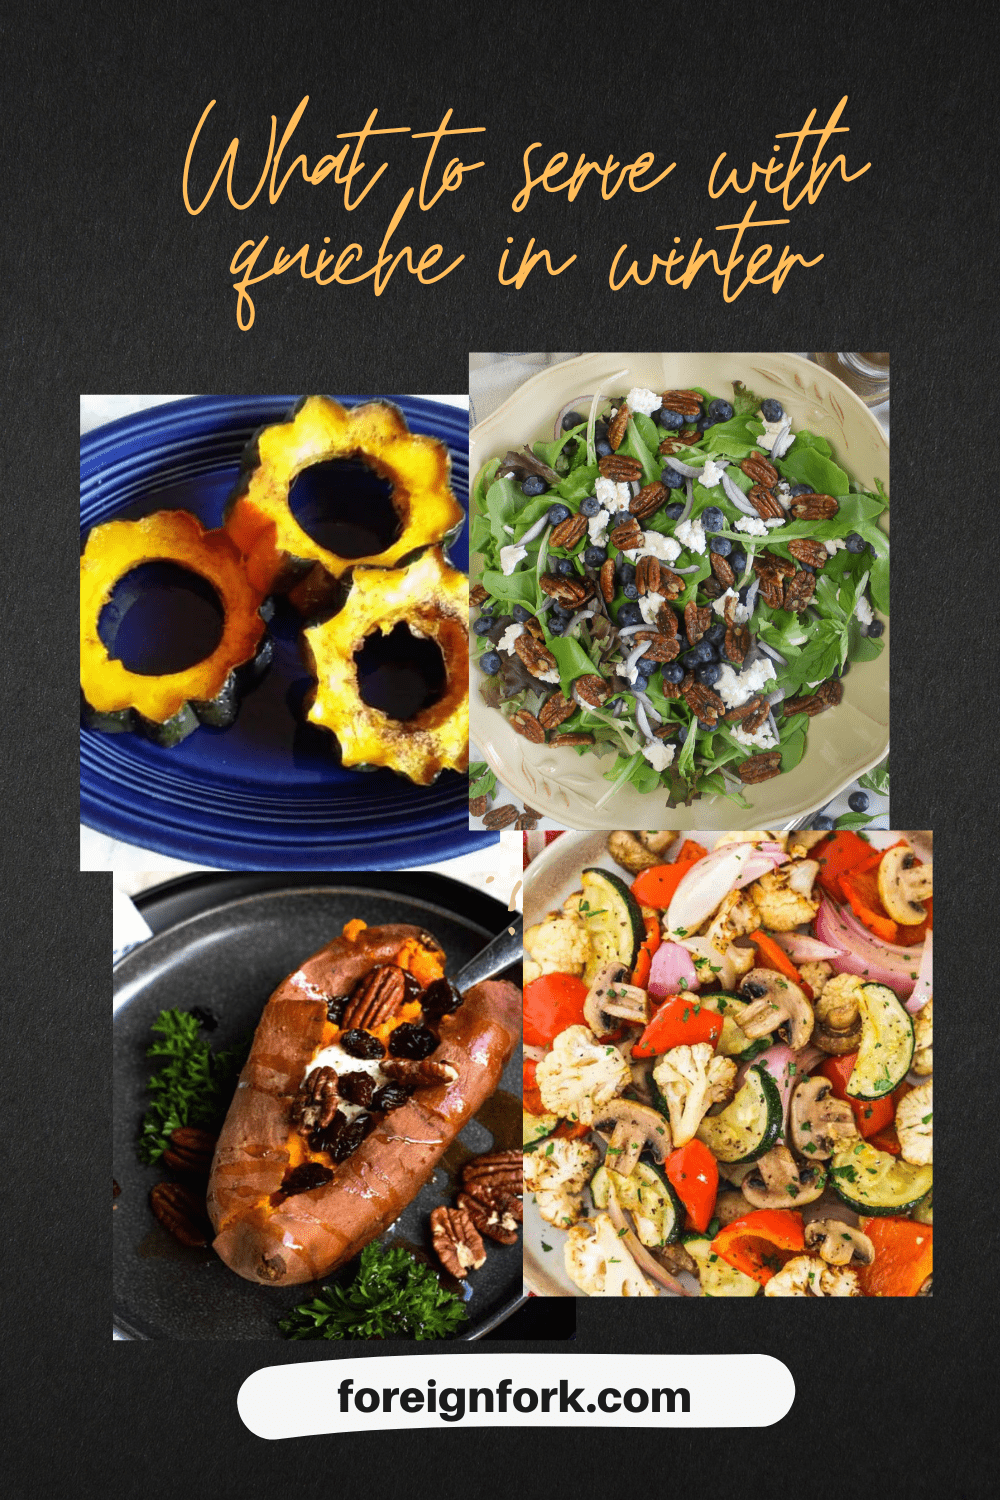 Pinterest image for what to serve with quiche in winter - a collage of 4 foods that would pair with quiche. 